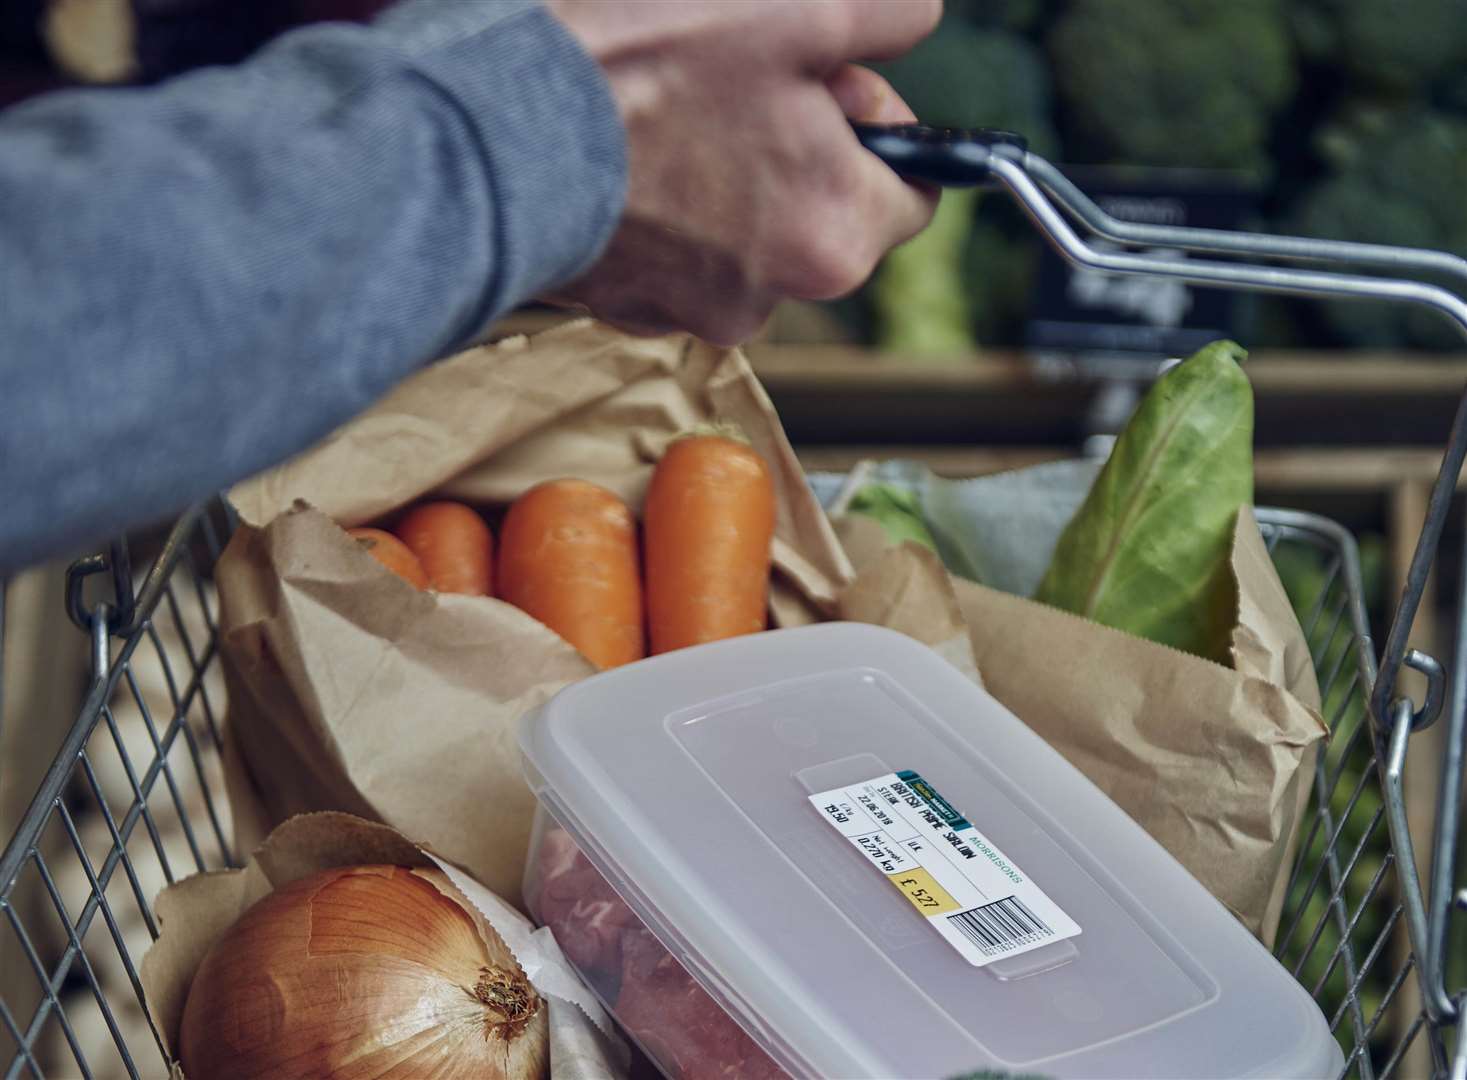 Shoppers are being asked to bring their own containers with them for fish, meal and deli products